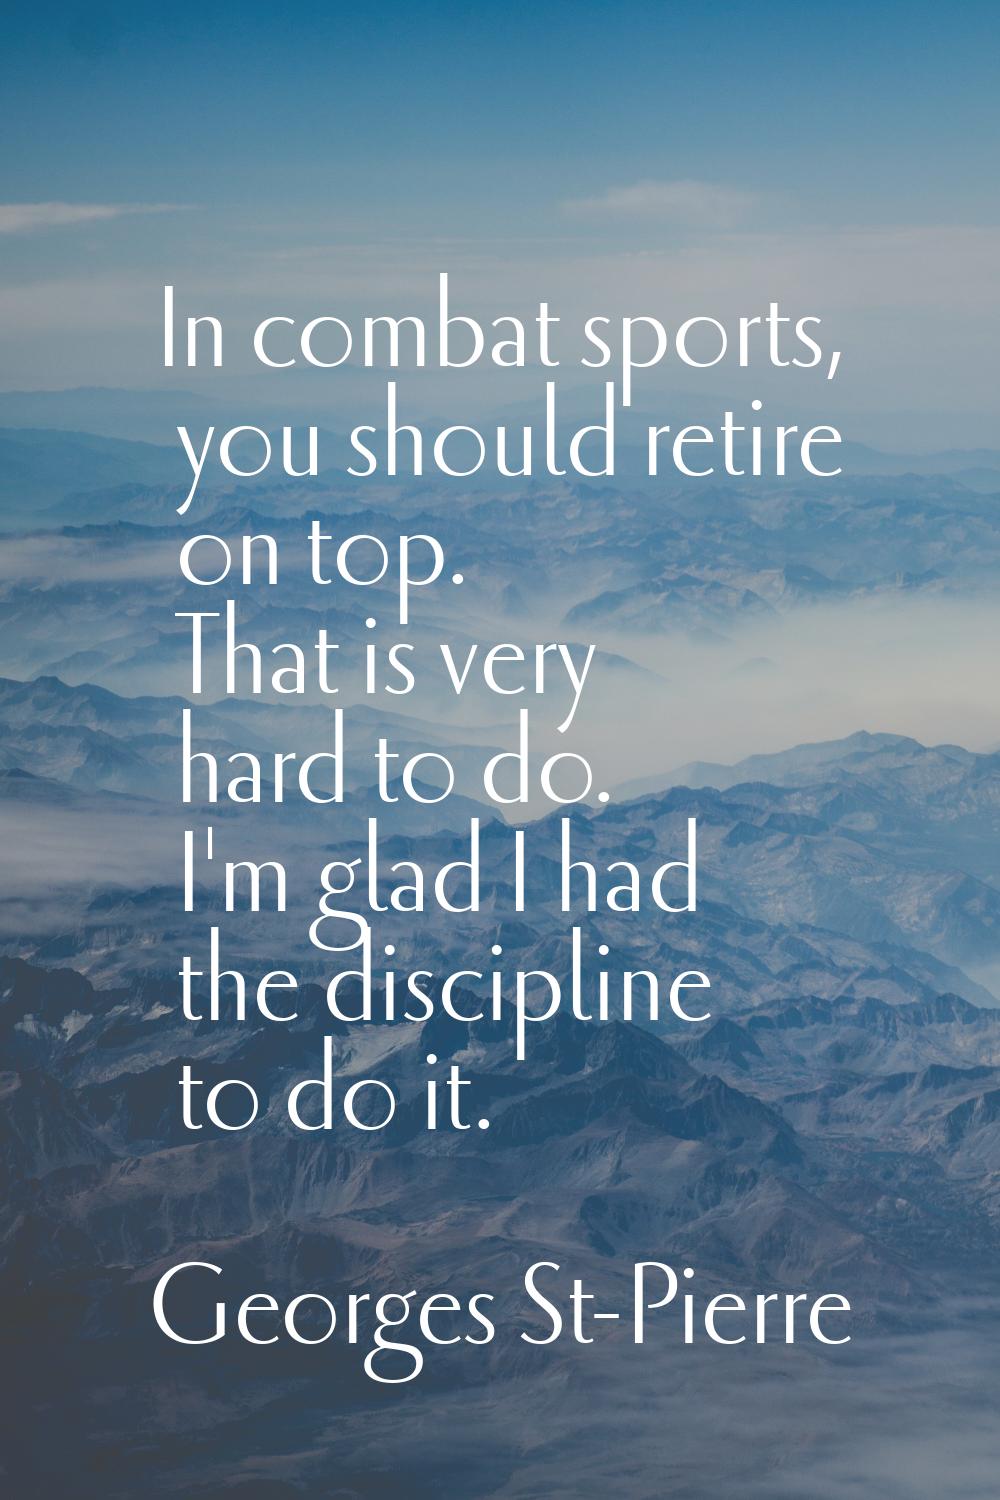 In combat sports, you should retire on top. That is very hard to do. I'm glad I had the discipline 